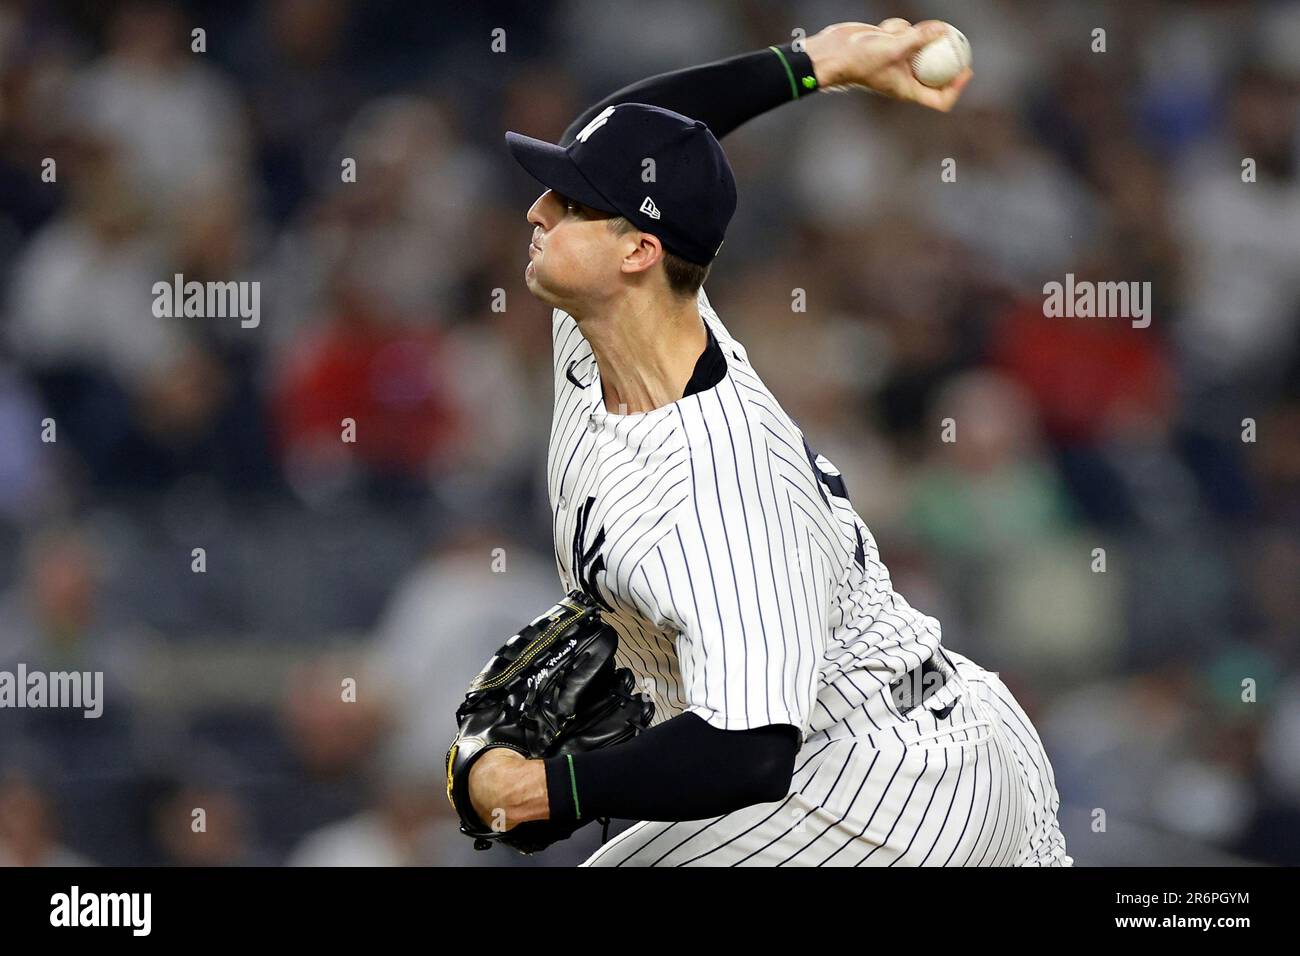 New York Yankees pitcher Clay Holmes throws against the Boston Red